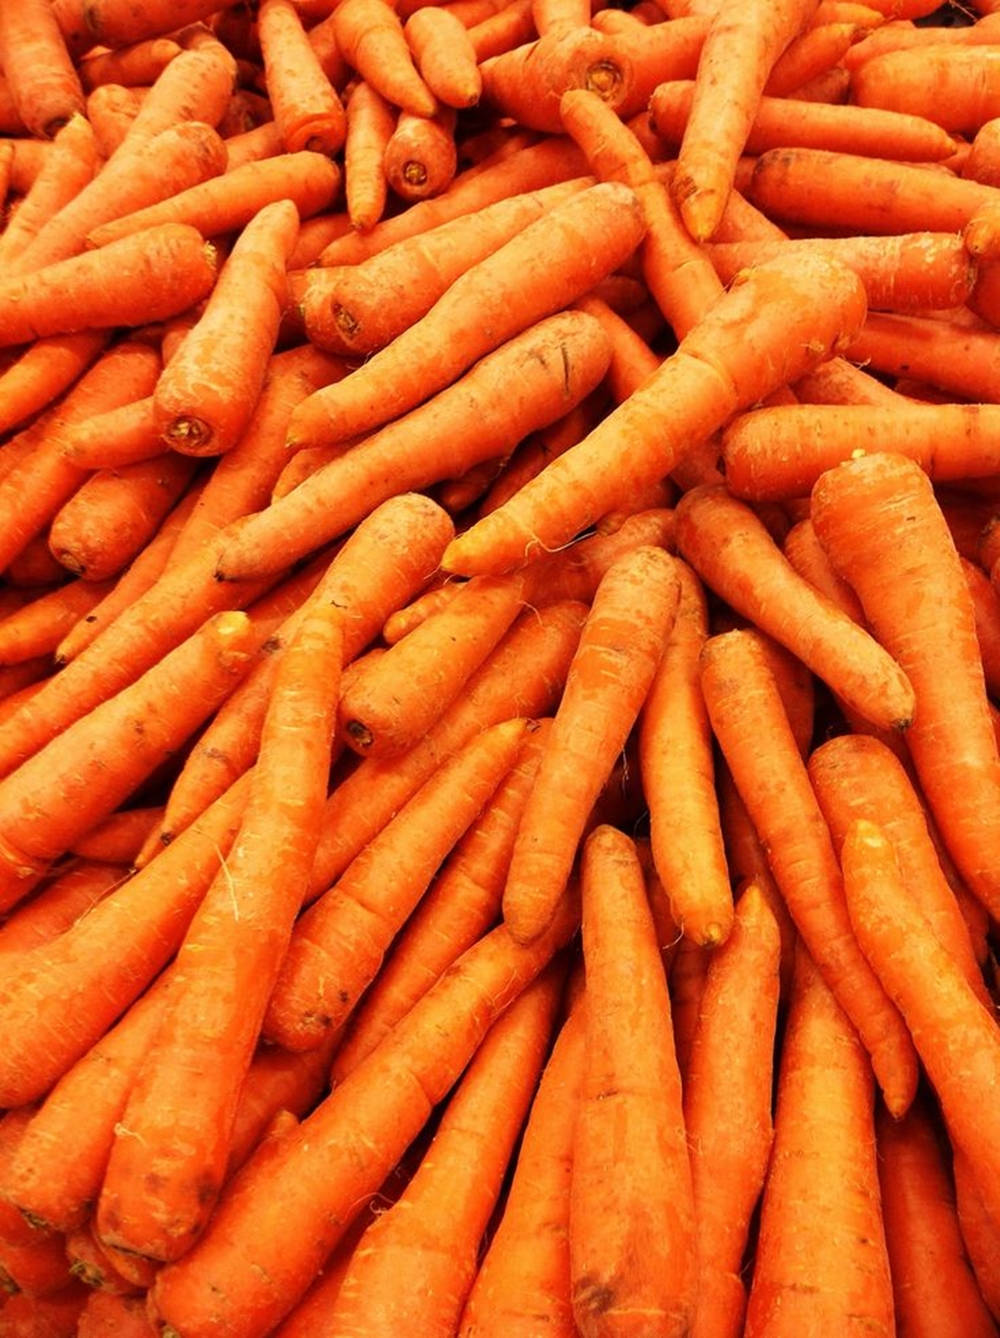 Pile Of Orange Carrots With No Stem Wallpaper